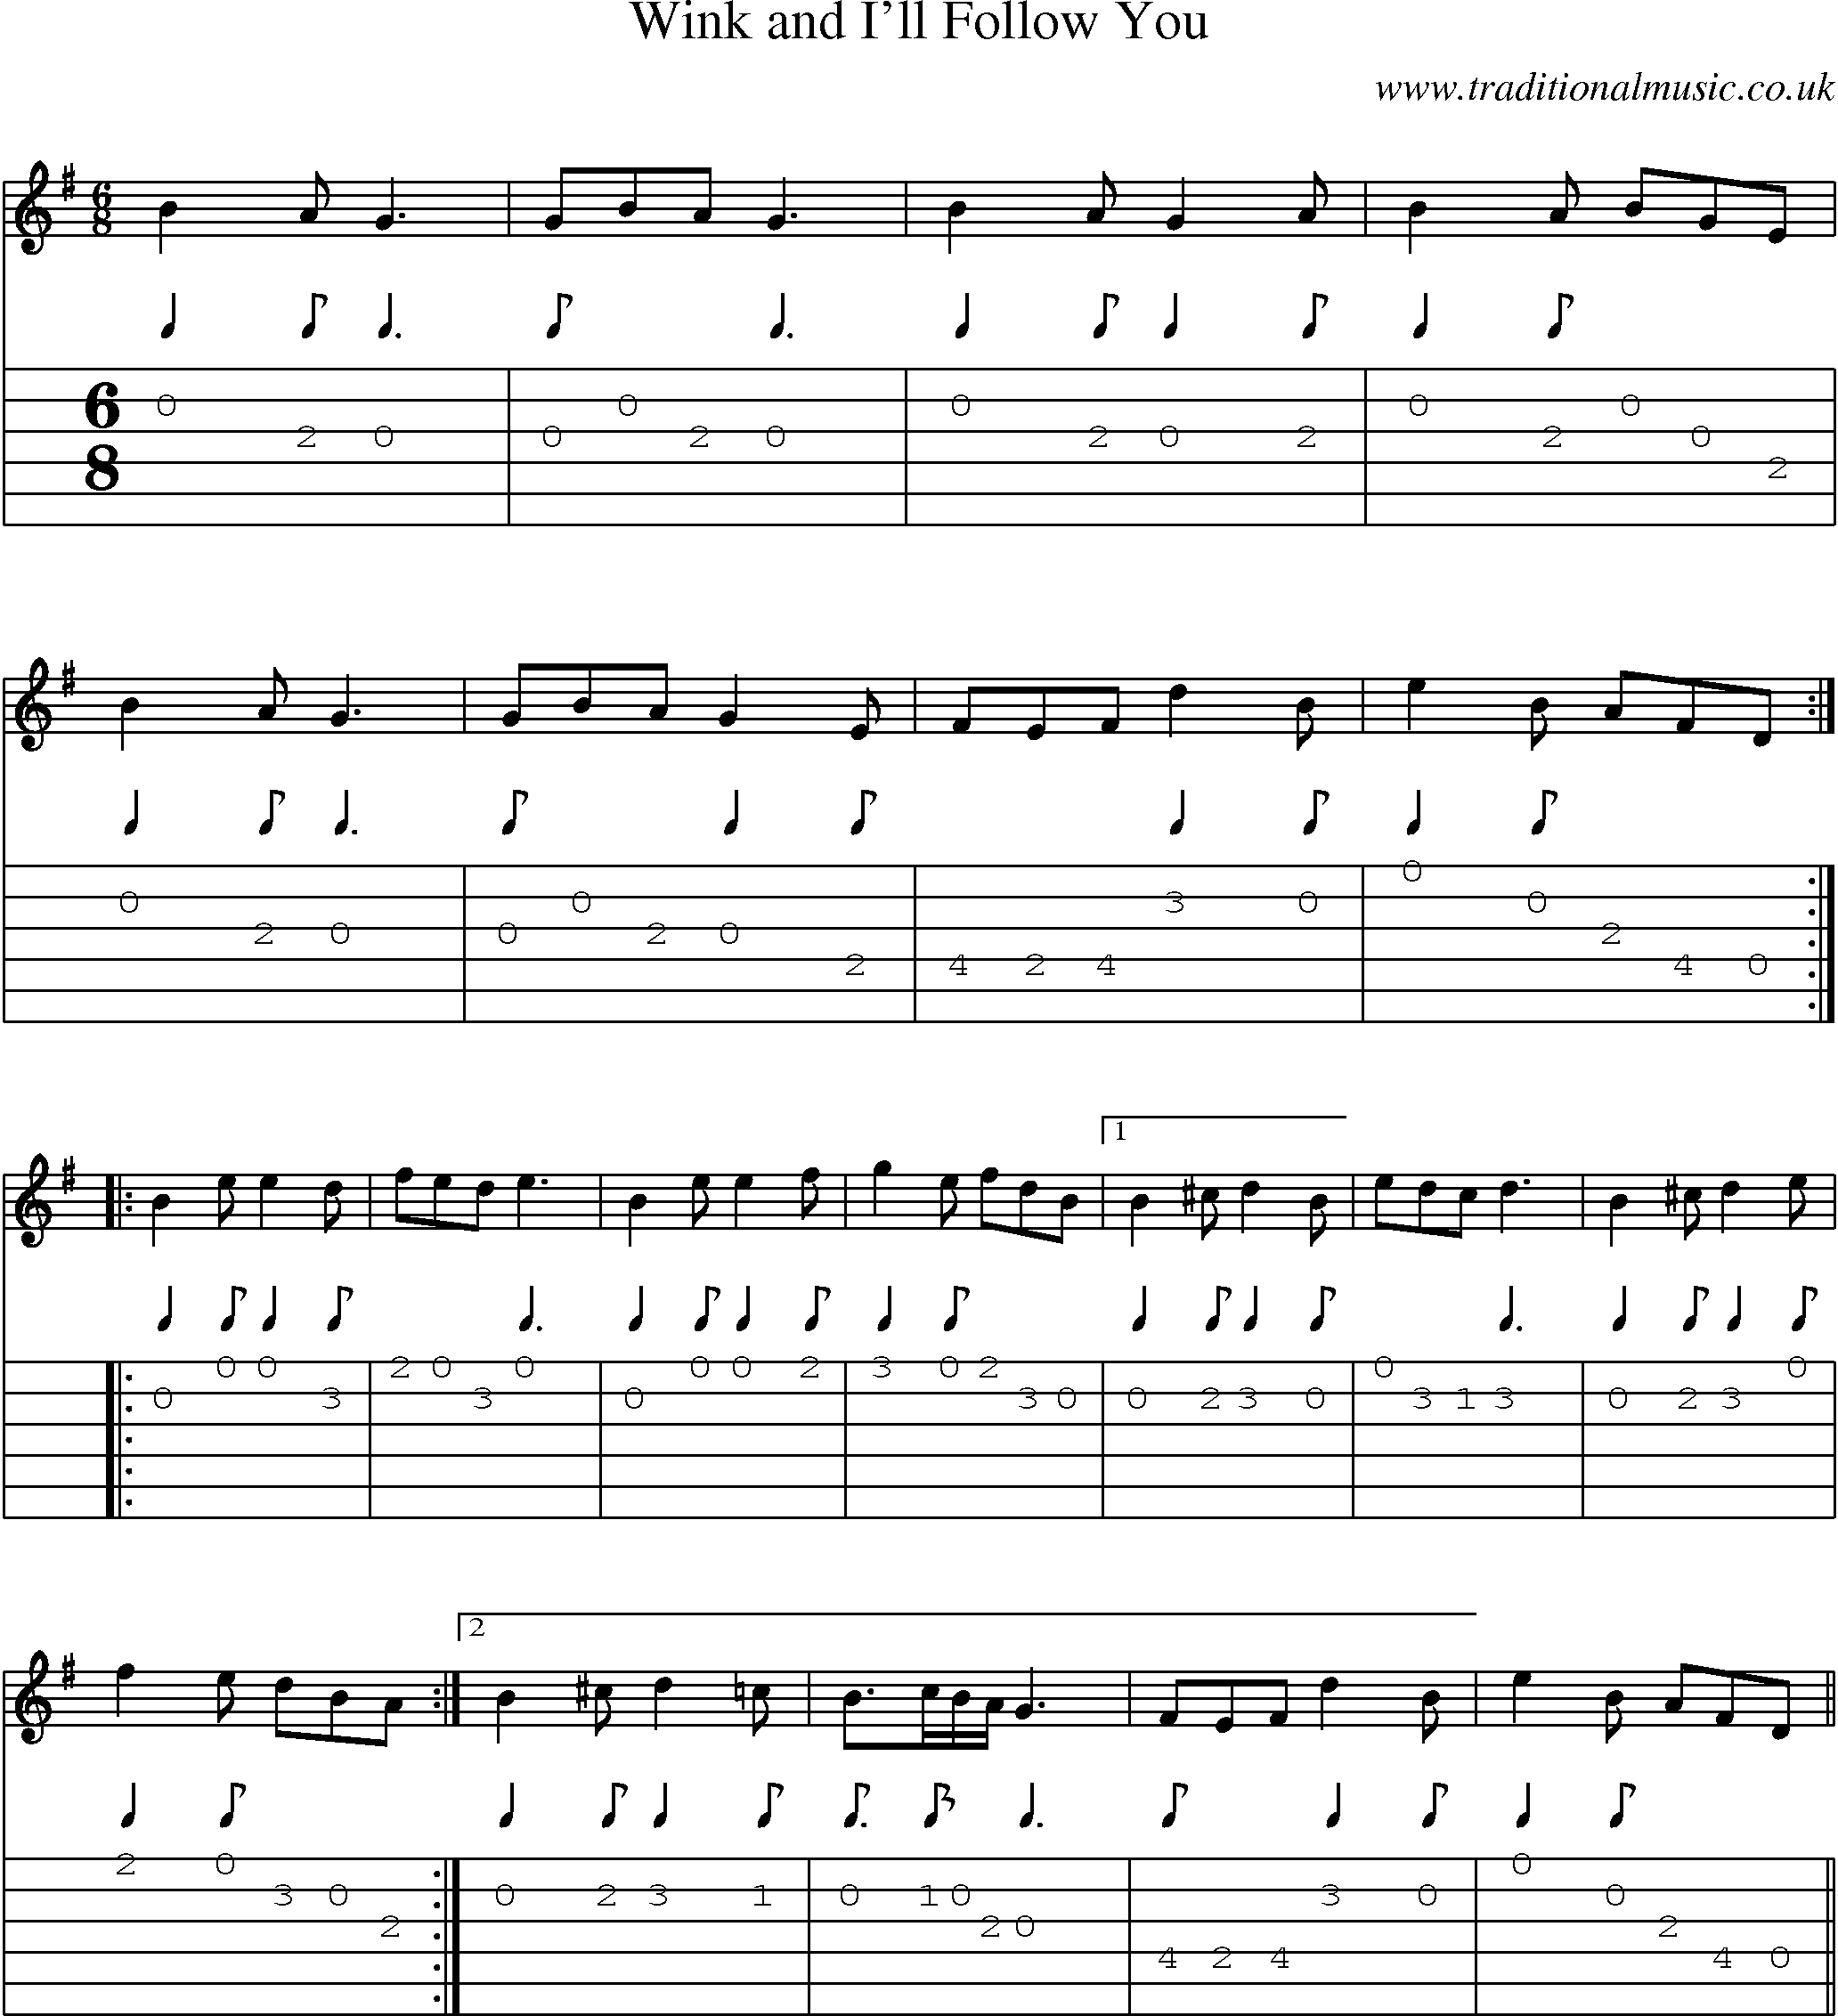 Music Score and Guitar Tabs for Wink And Ill Follow You